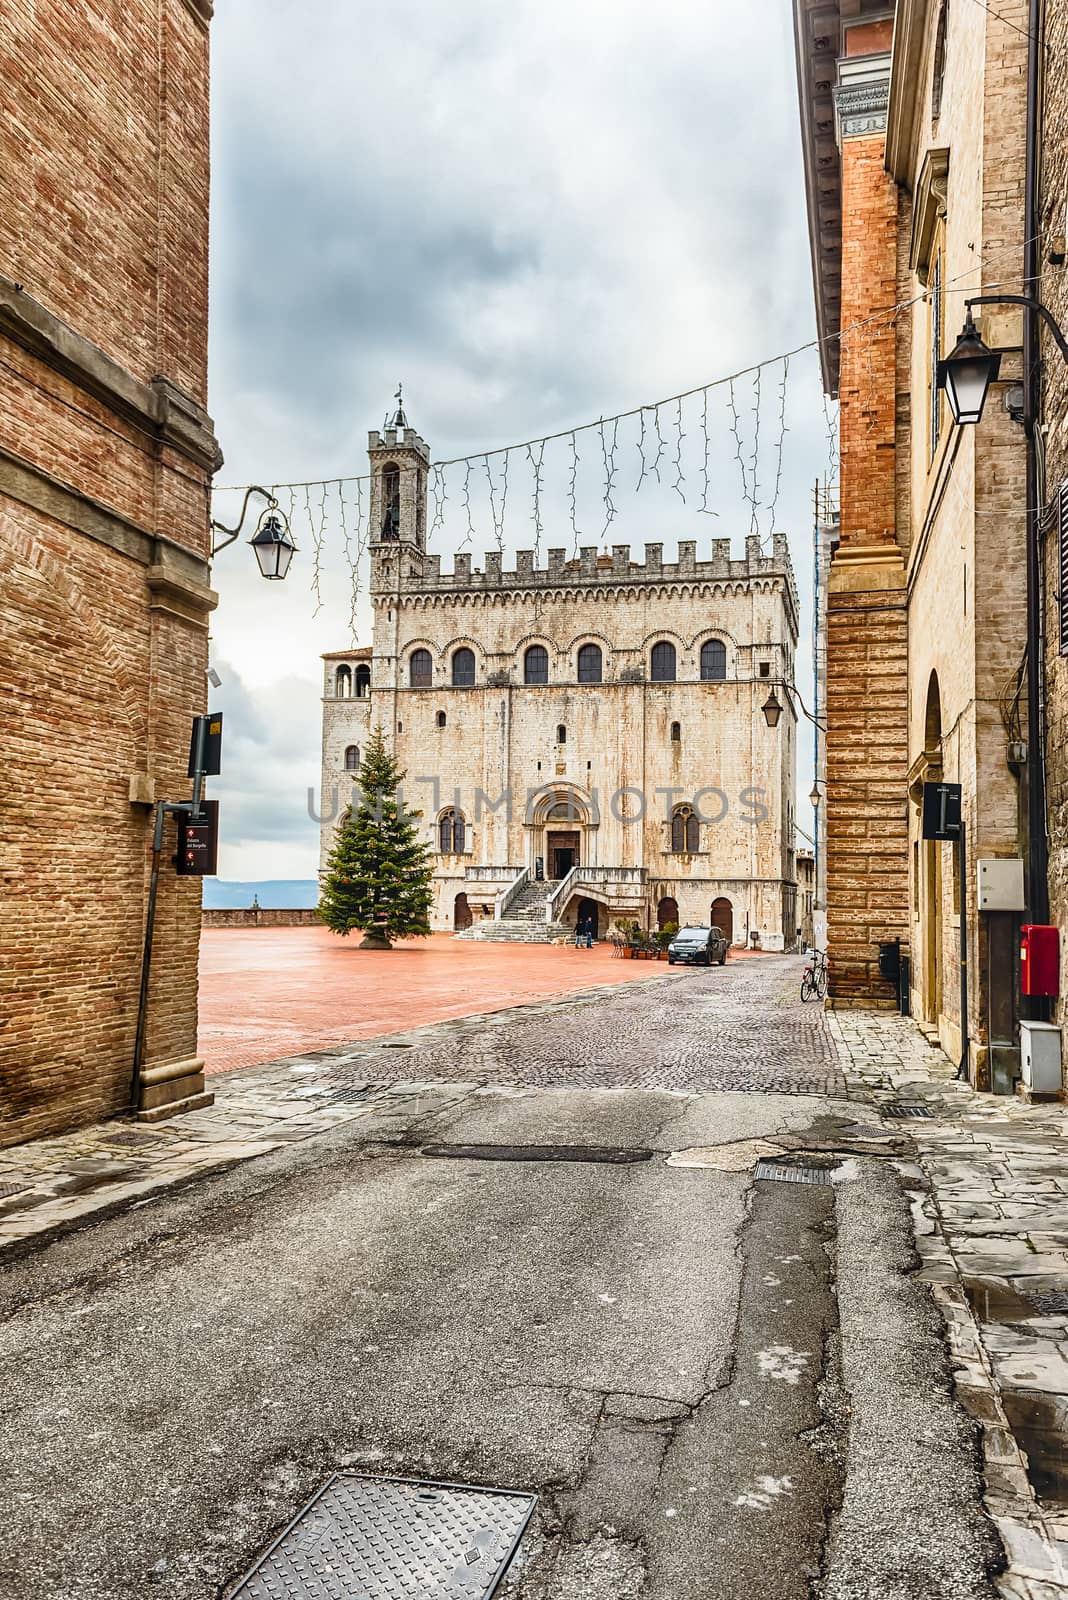 View of Palazzo dei Consoli, a medieval building facing the scenic Piazza Grande in Gubbio, Umbria, central Italy. It is house to the local Civic Museum